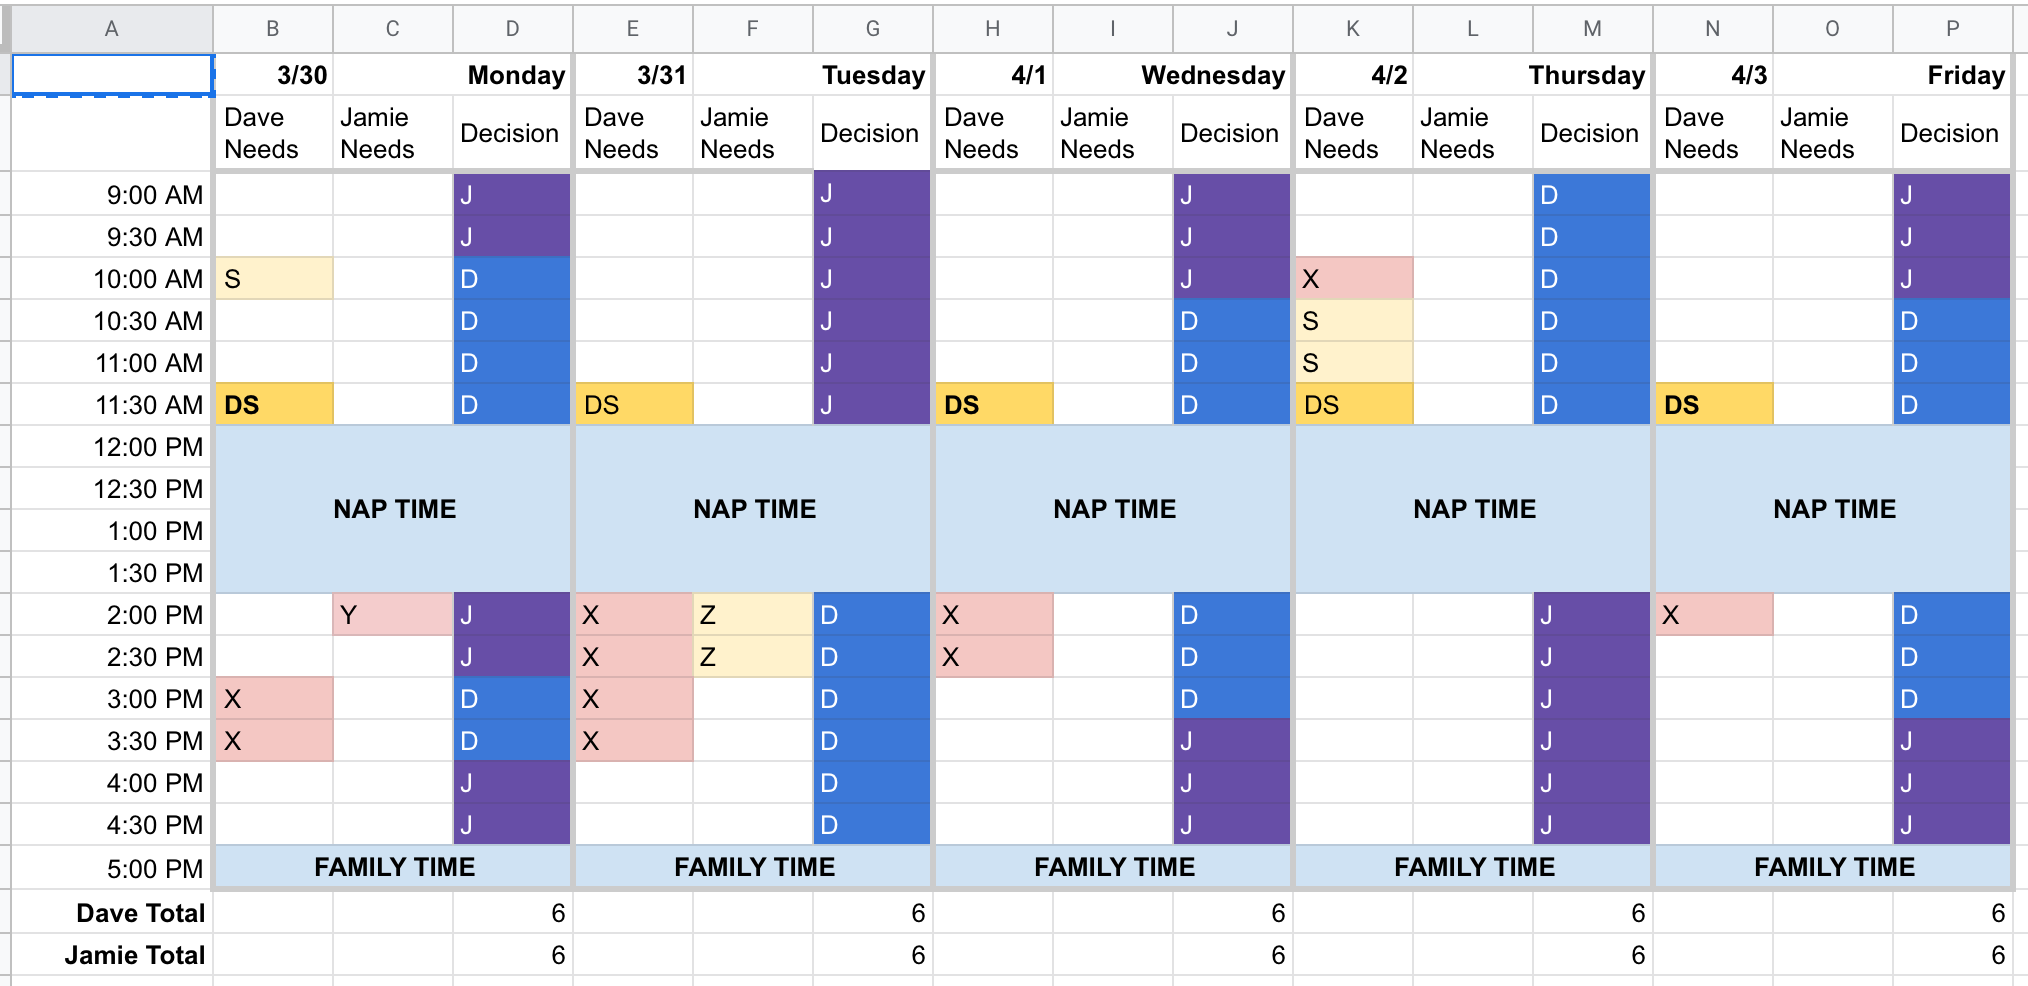 Spreadsheet for planning COVID-19 work at home parenting schedule.